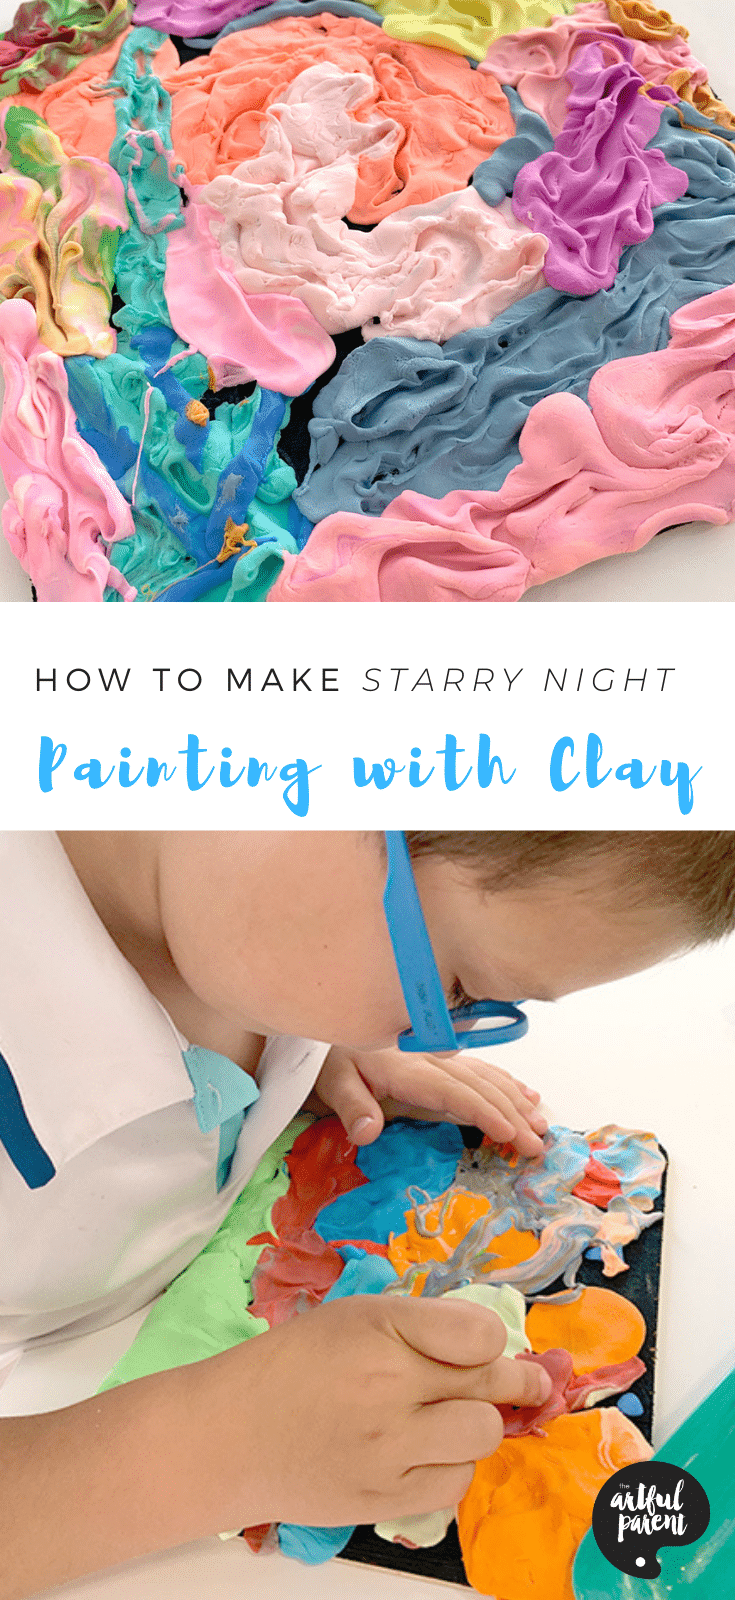 How to Make Starry Night by Painting with Clay.